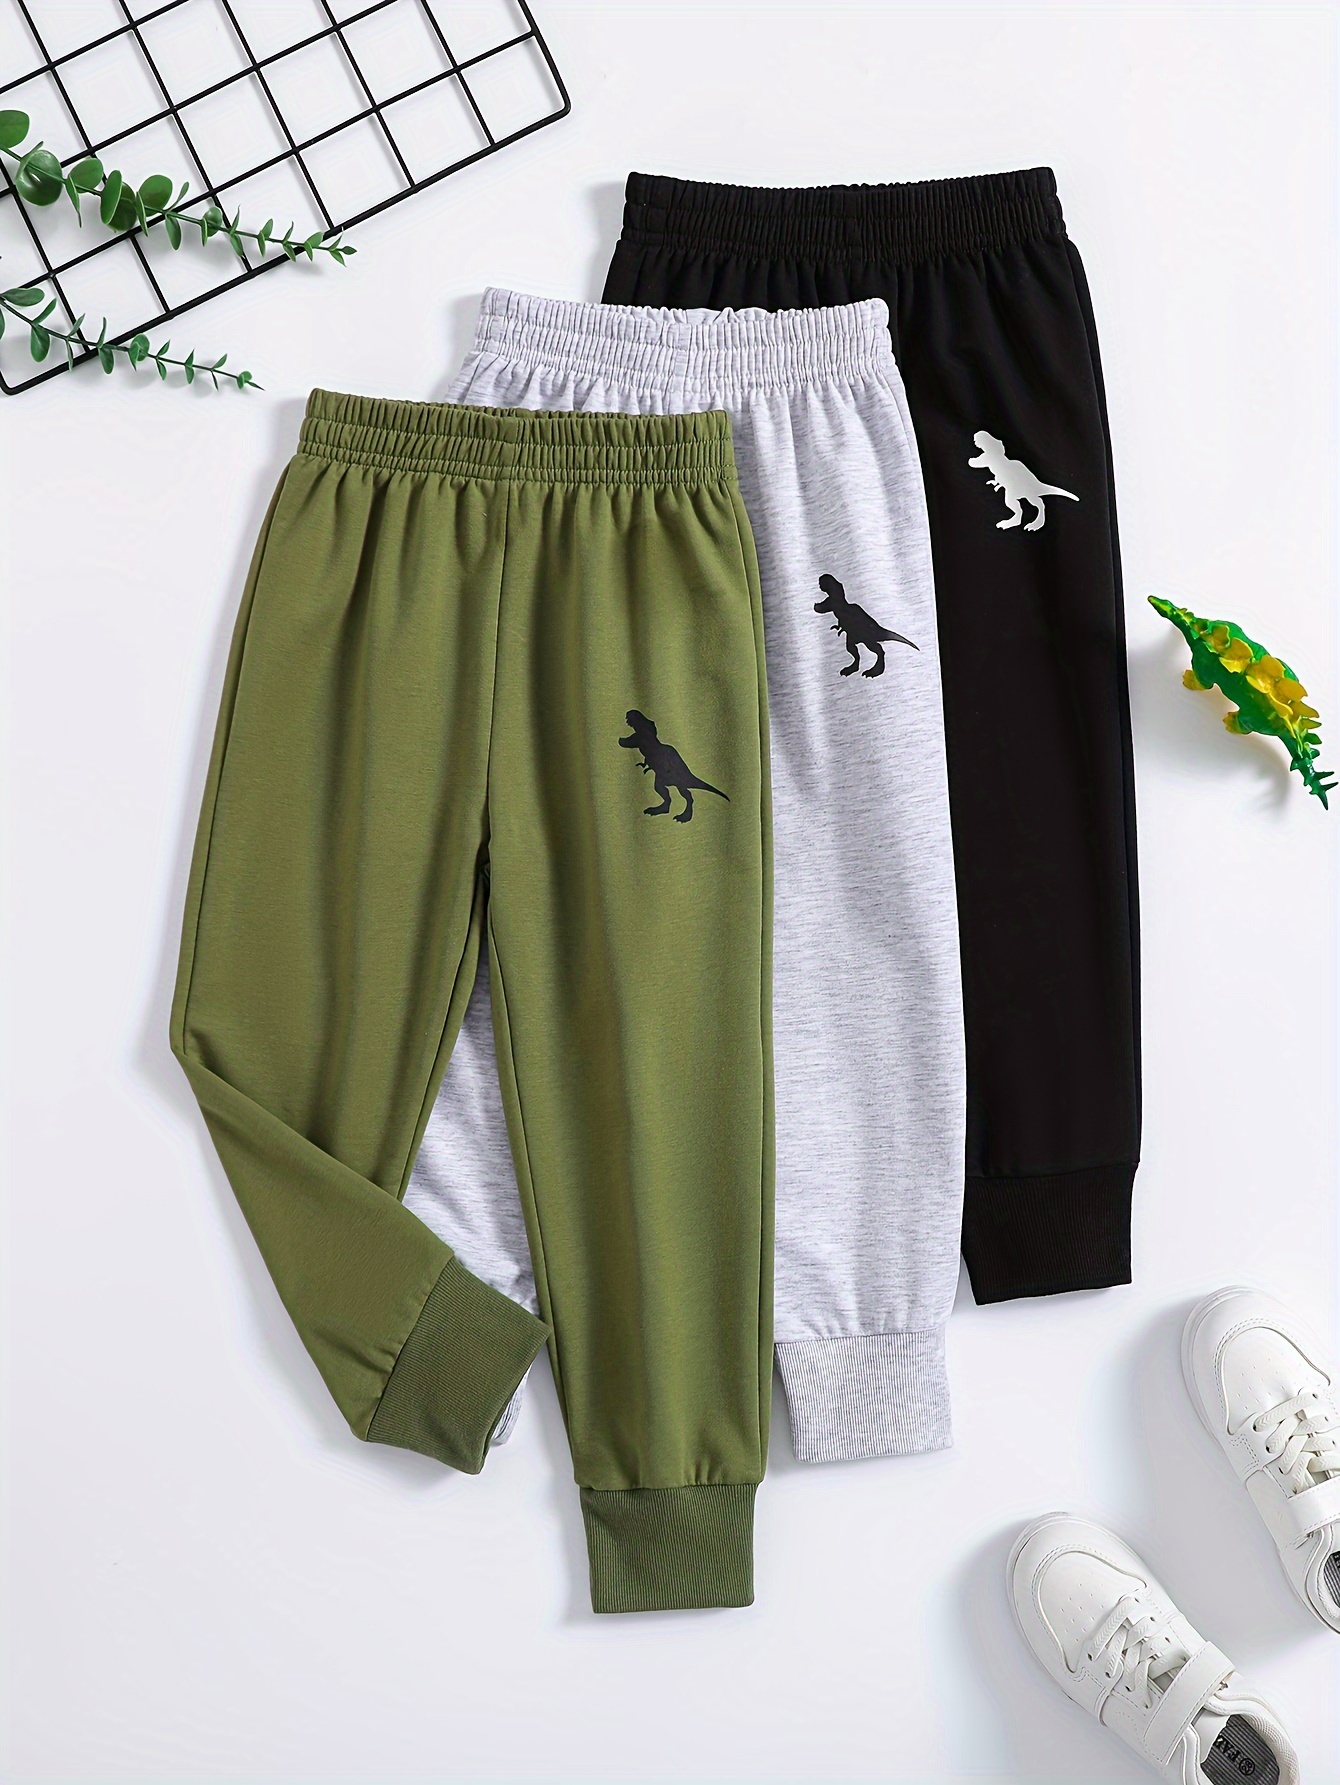 ZHAGHMIN Boys Dance Pants Toddler Boys Girls Solid Color Cool Breathable  Home Pants Casual Pants Outwear Fashion for Children Clothes Boys  Sweatpants